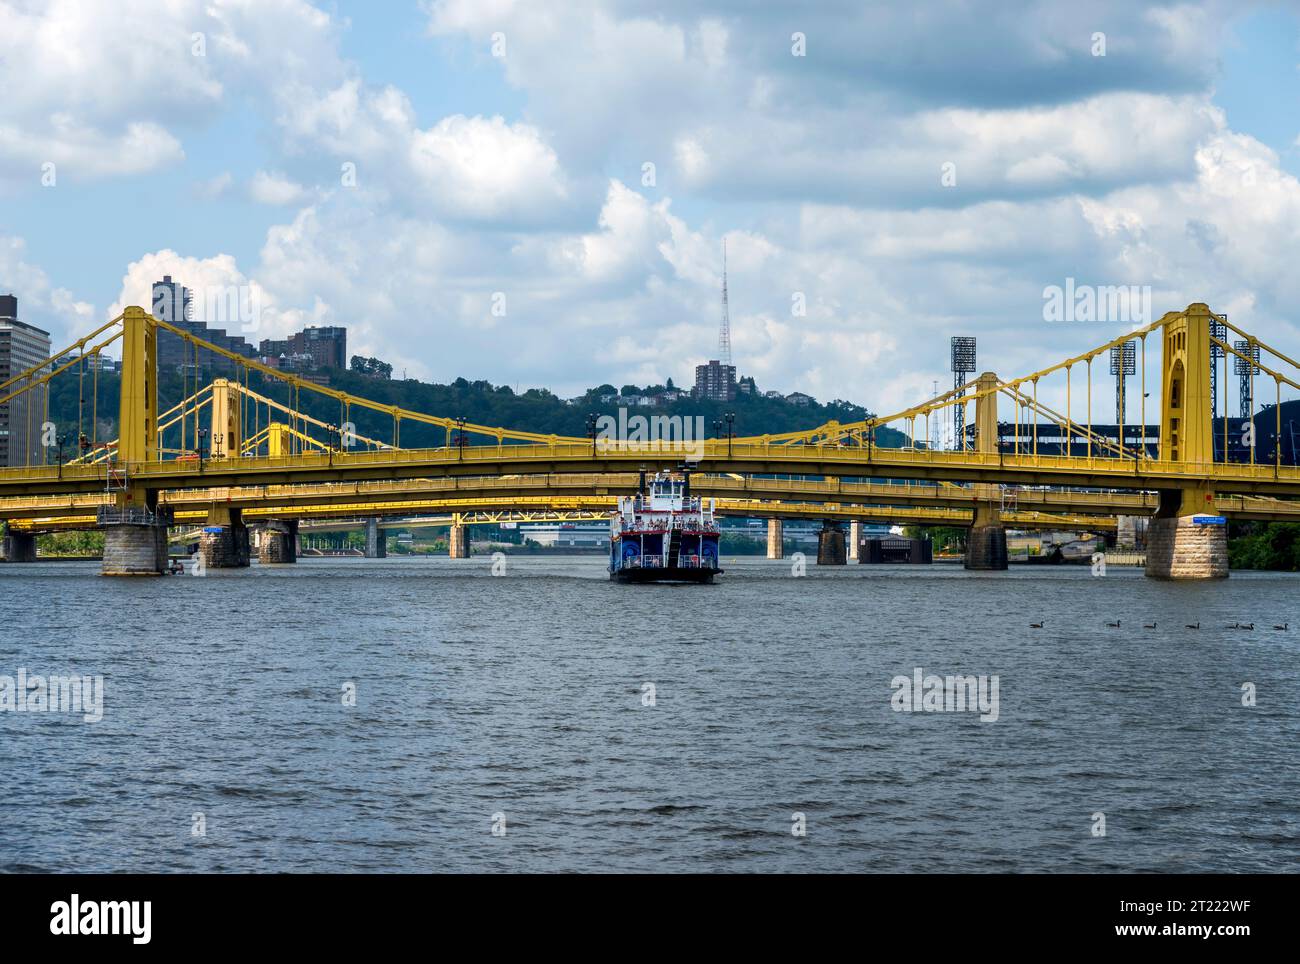 A tourist boat passes under the three yellow suspension bridges on the Allegheny River, Pittsburgh, Pennsylvania. Stock Photo